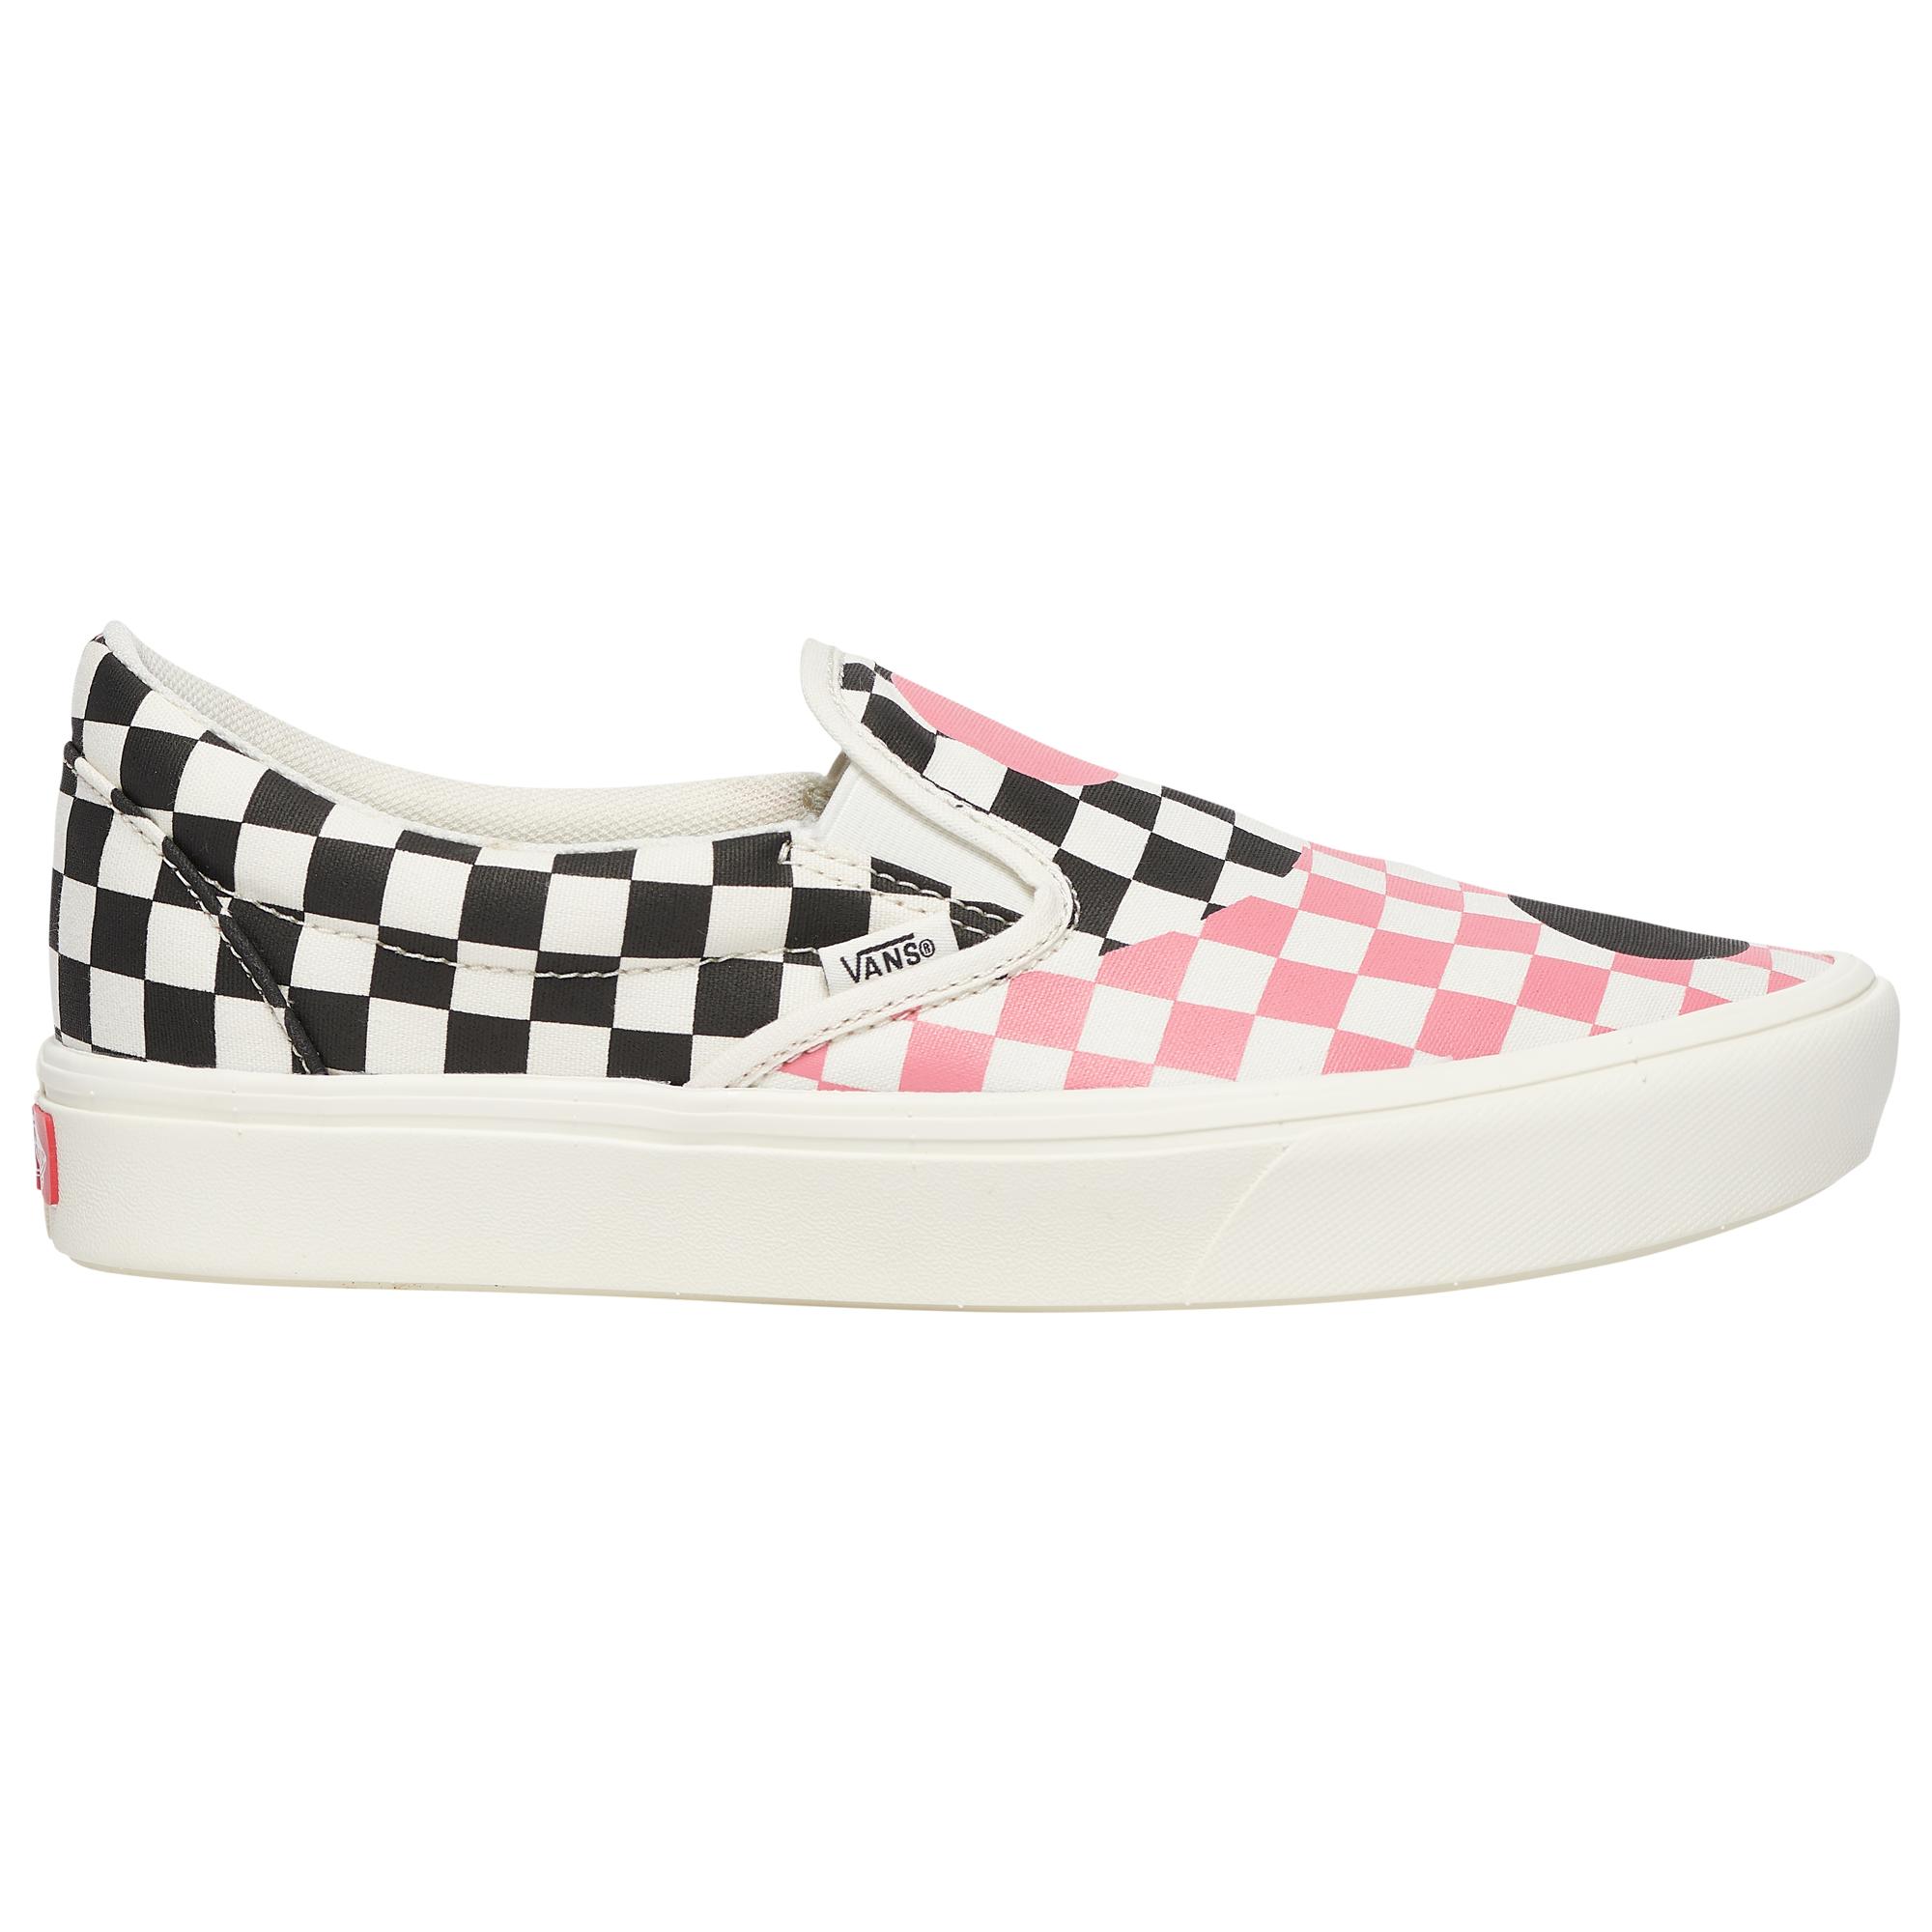 Vans Canvas Slip On Comfy Cushion - Shoes in Black/Pink/White (Pink ...